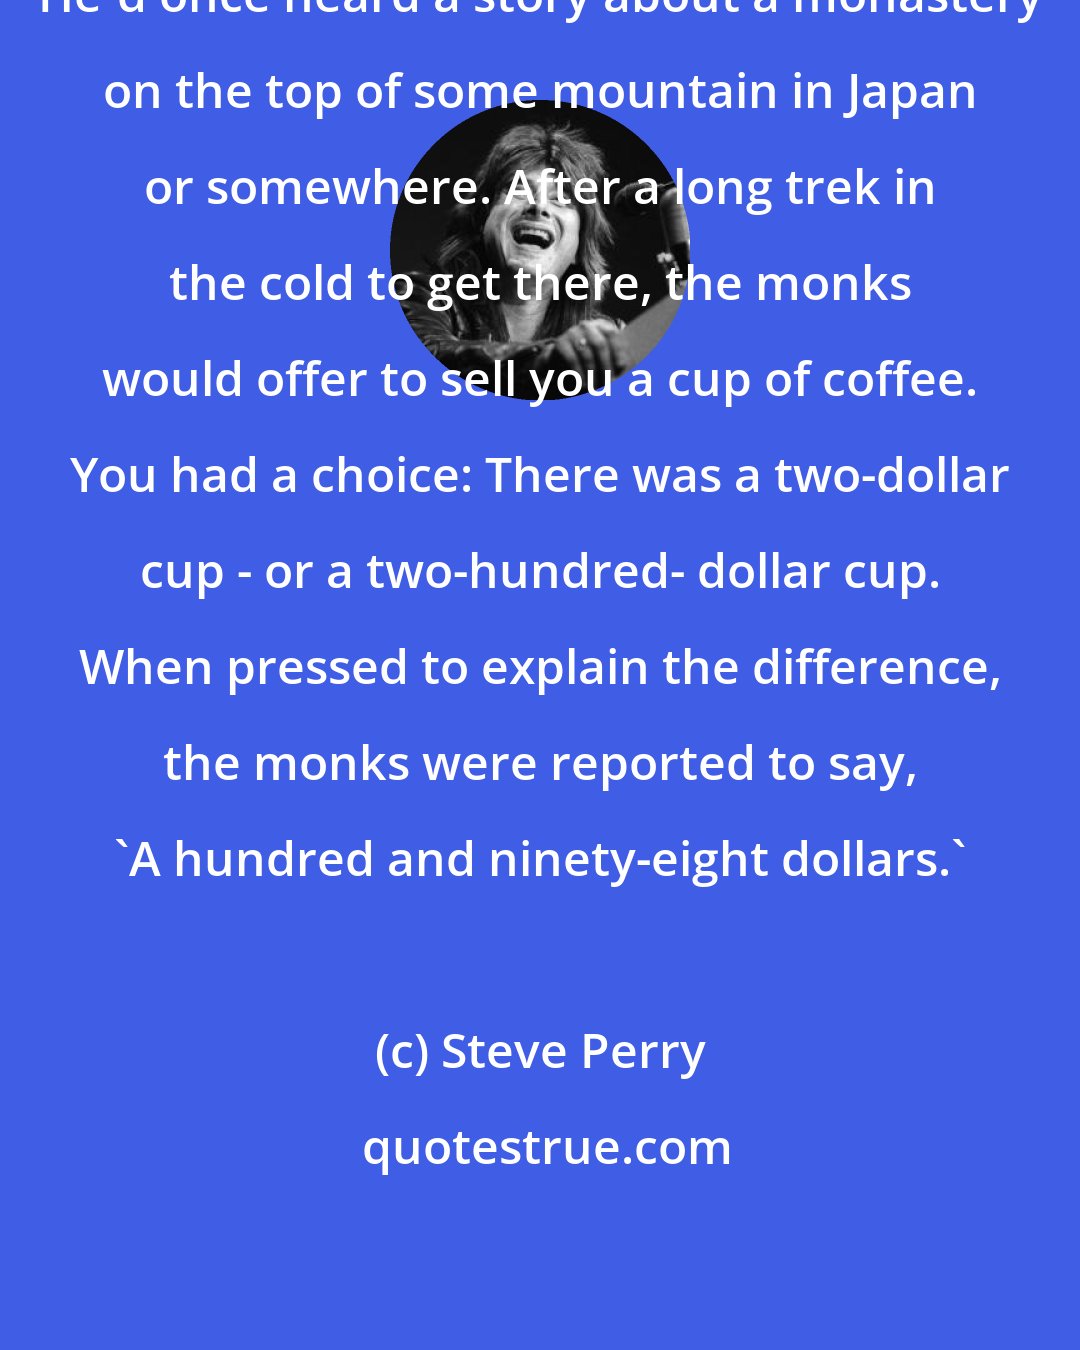 Steve Perry: He'd once heard a story about a monastery on the top of some mountain in Japan or somewhere. After a long trek in the cold to get there, the monks would offer to sell you a cup of coffee. You had a choice: There was a two-dollar cup - or a two-hundred- dollar cup. When pressed to explain the difference, the monks were reported to say, 'A hundred and ninety-eight dollars.'